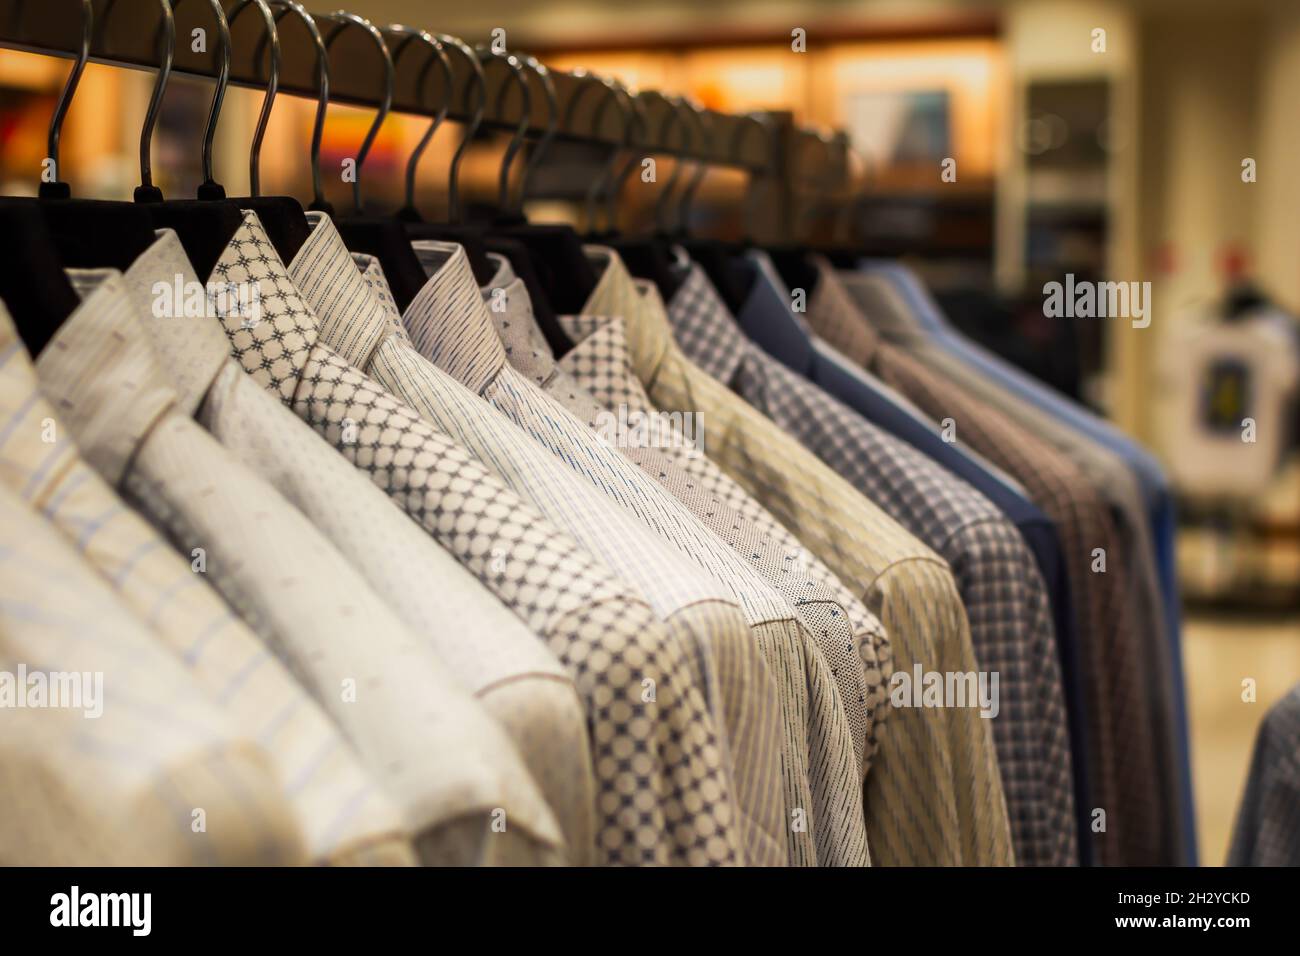 Premium Photo  Men's shirts on hangers in the store, close-up